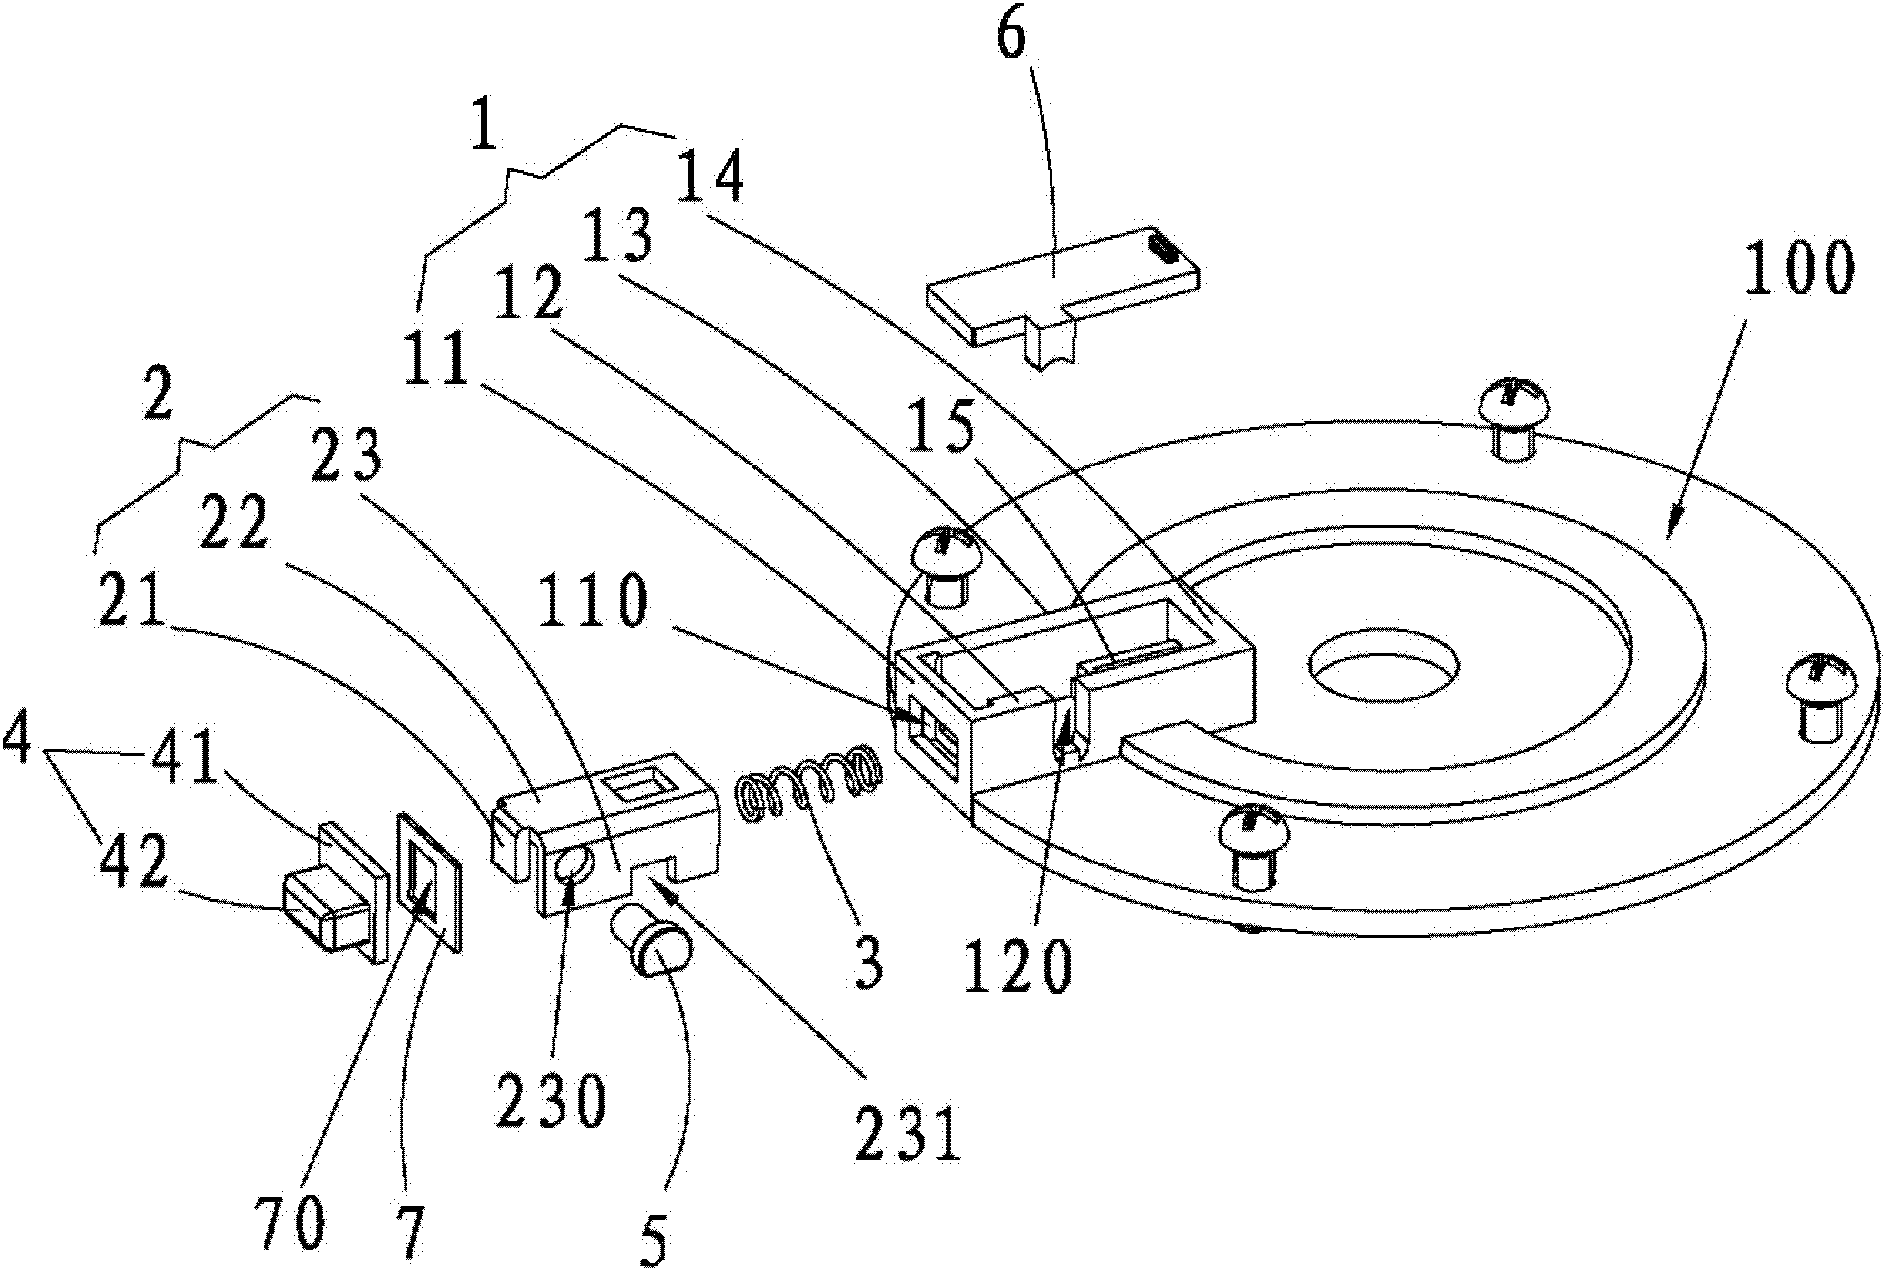 Limiting button structure and wire spool